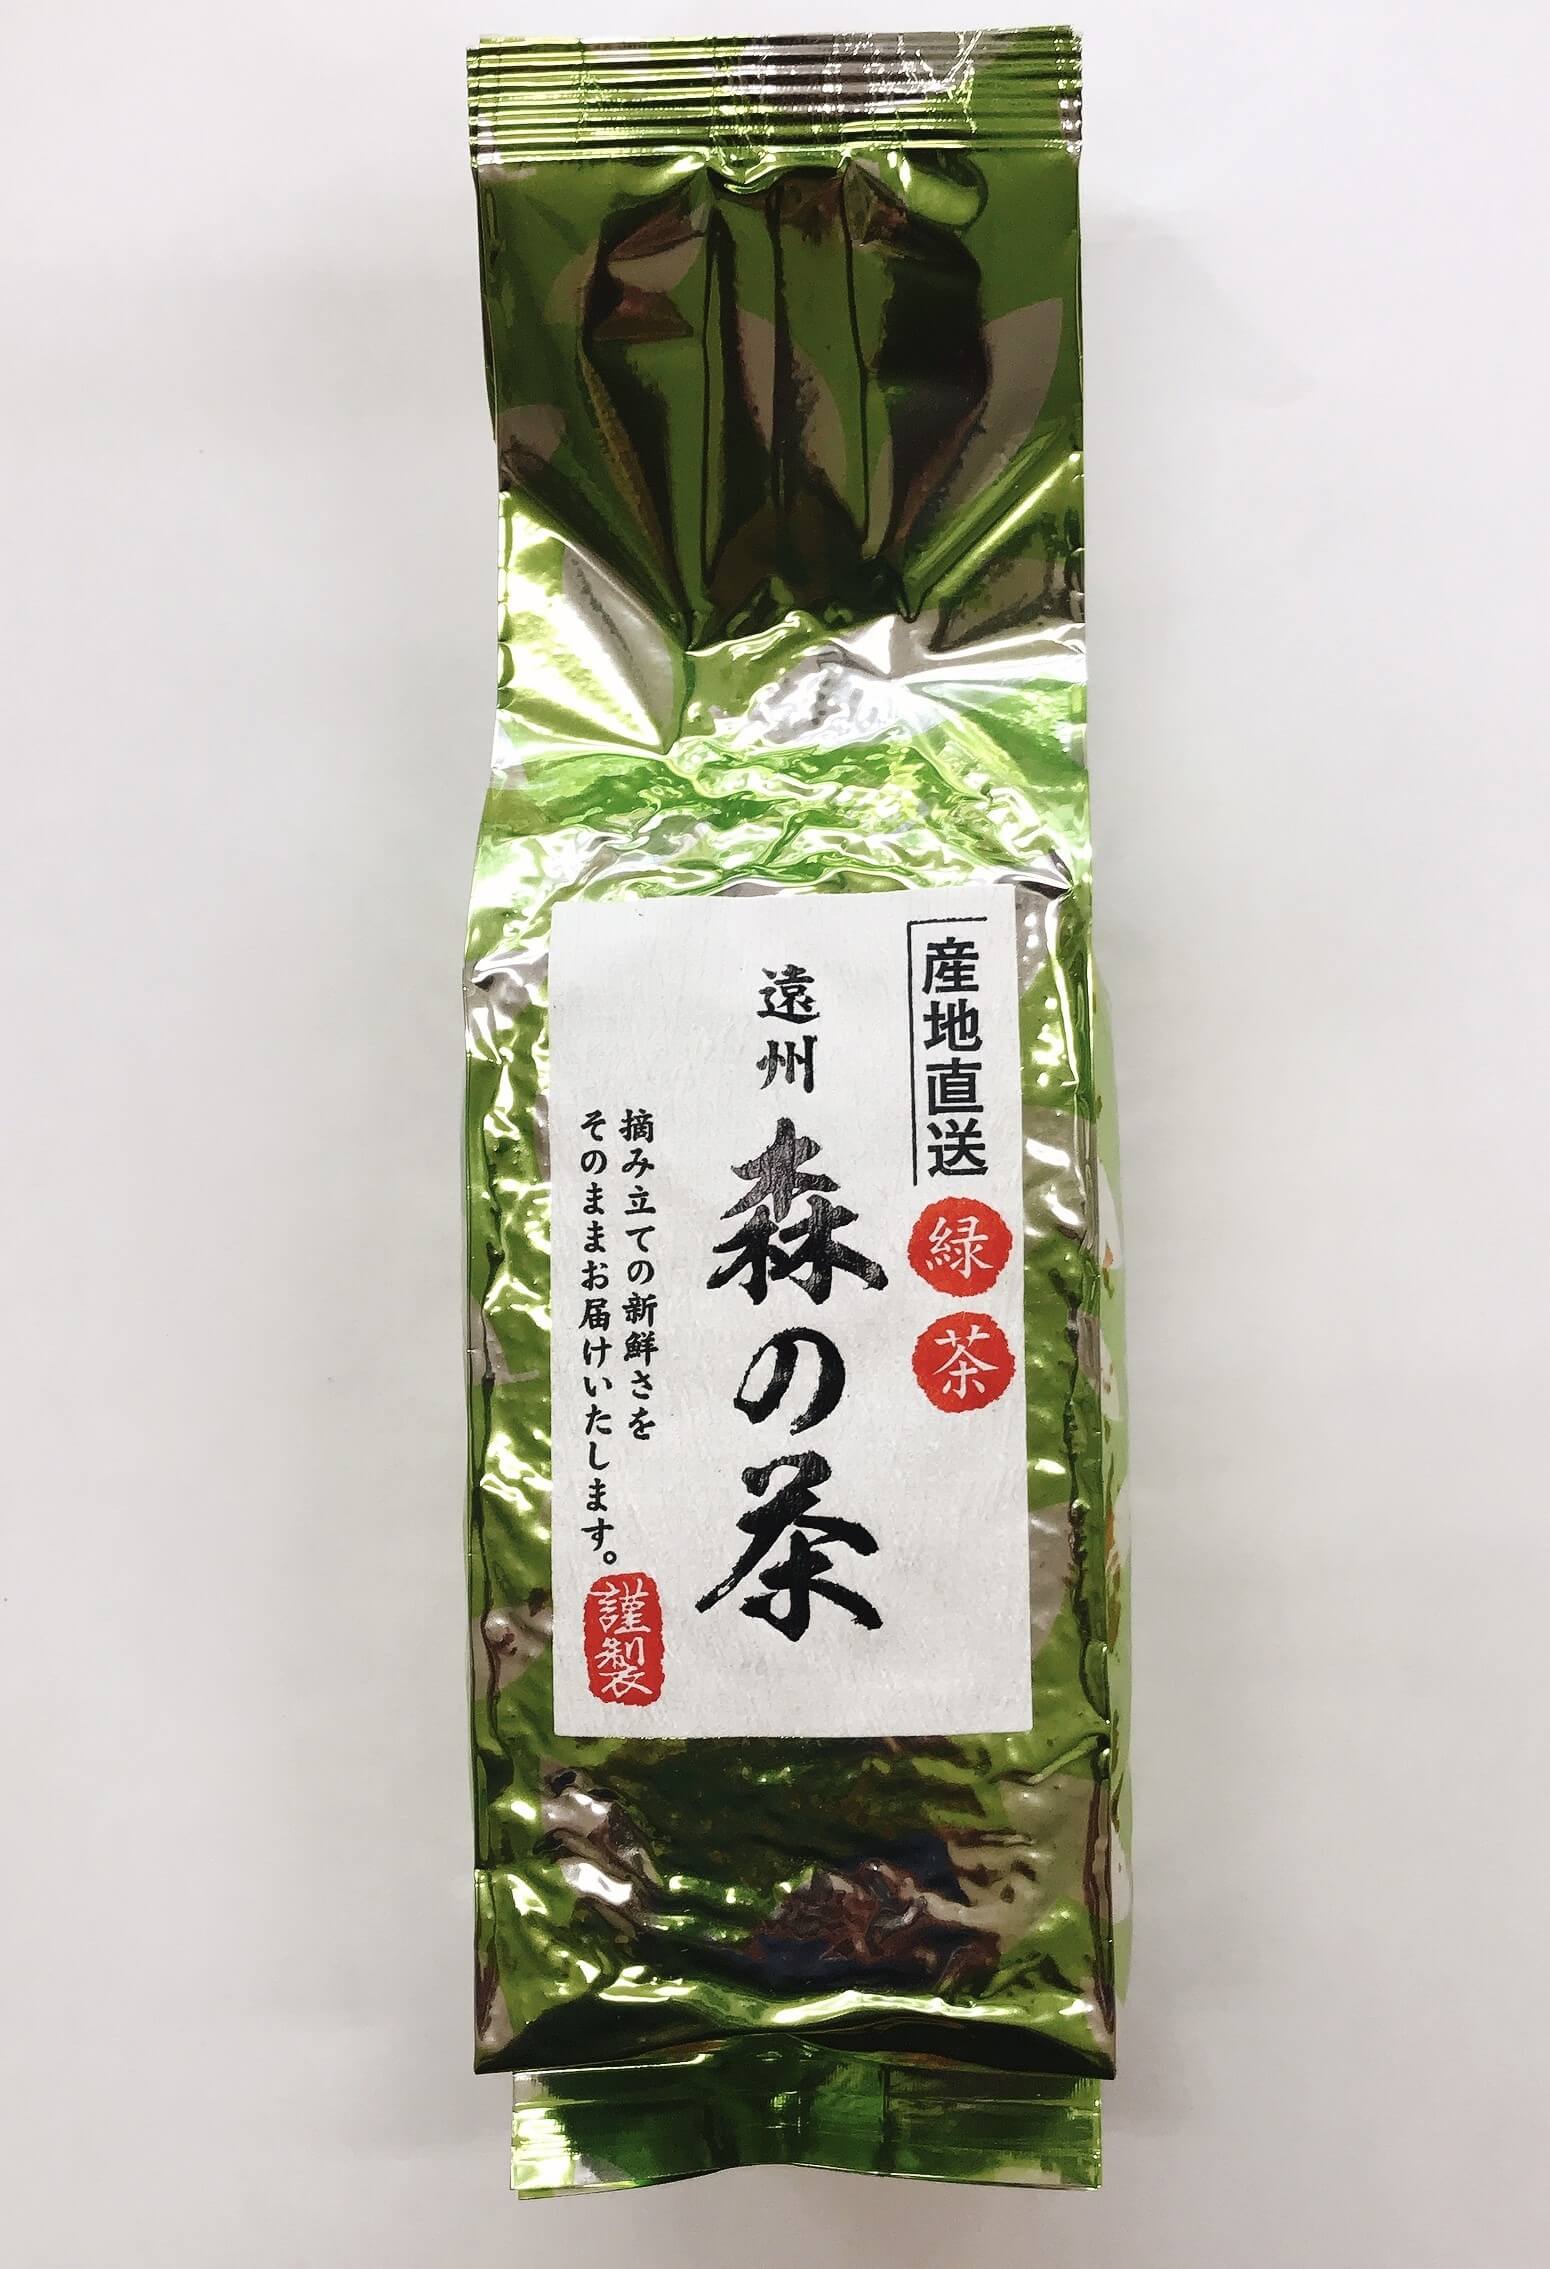 300g of green tea direct from the farm